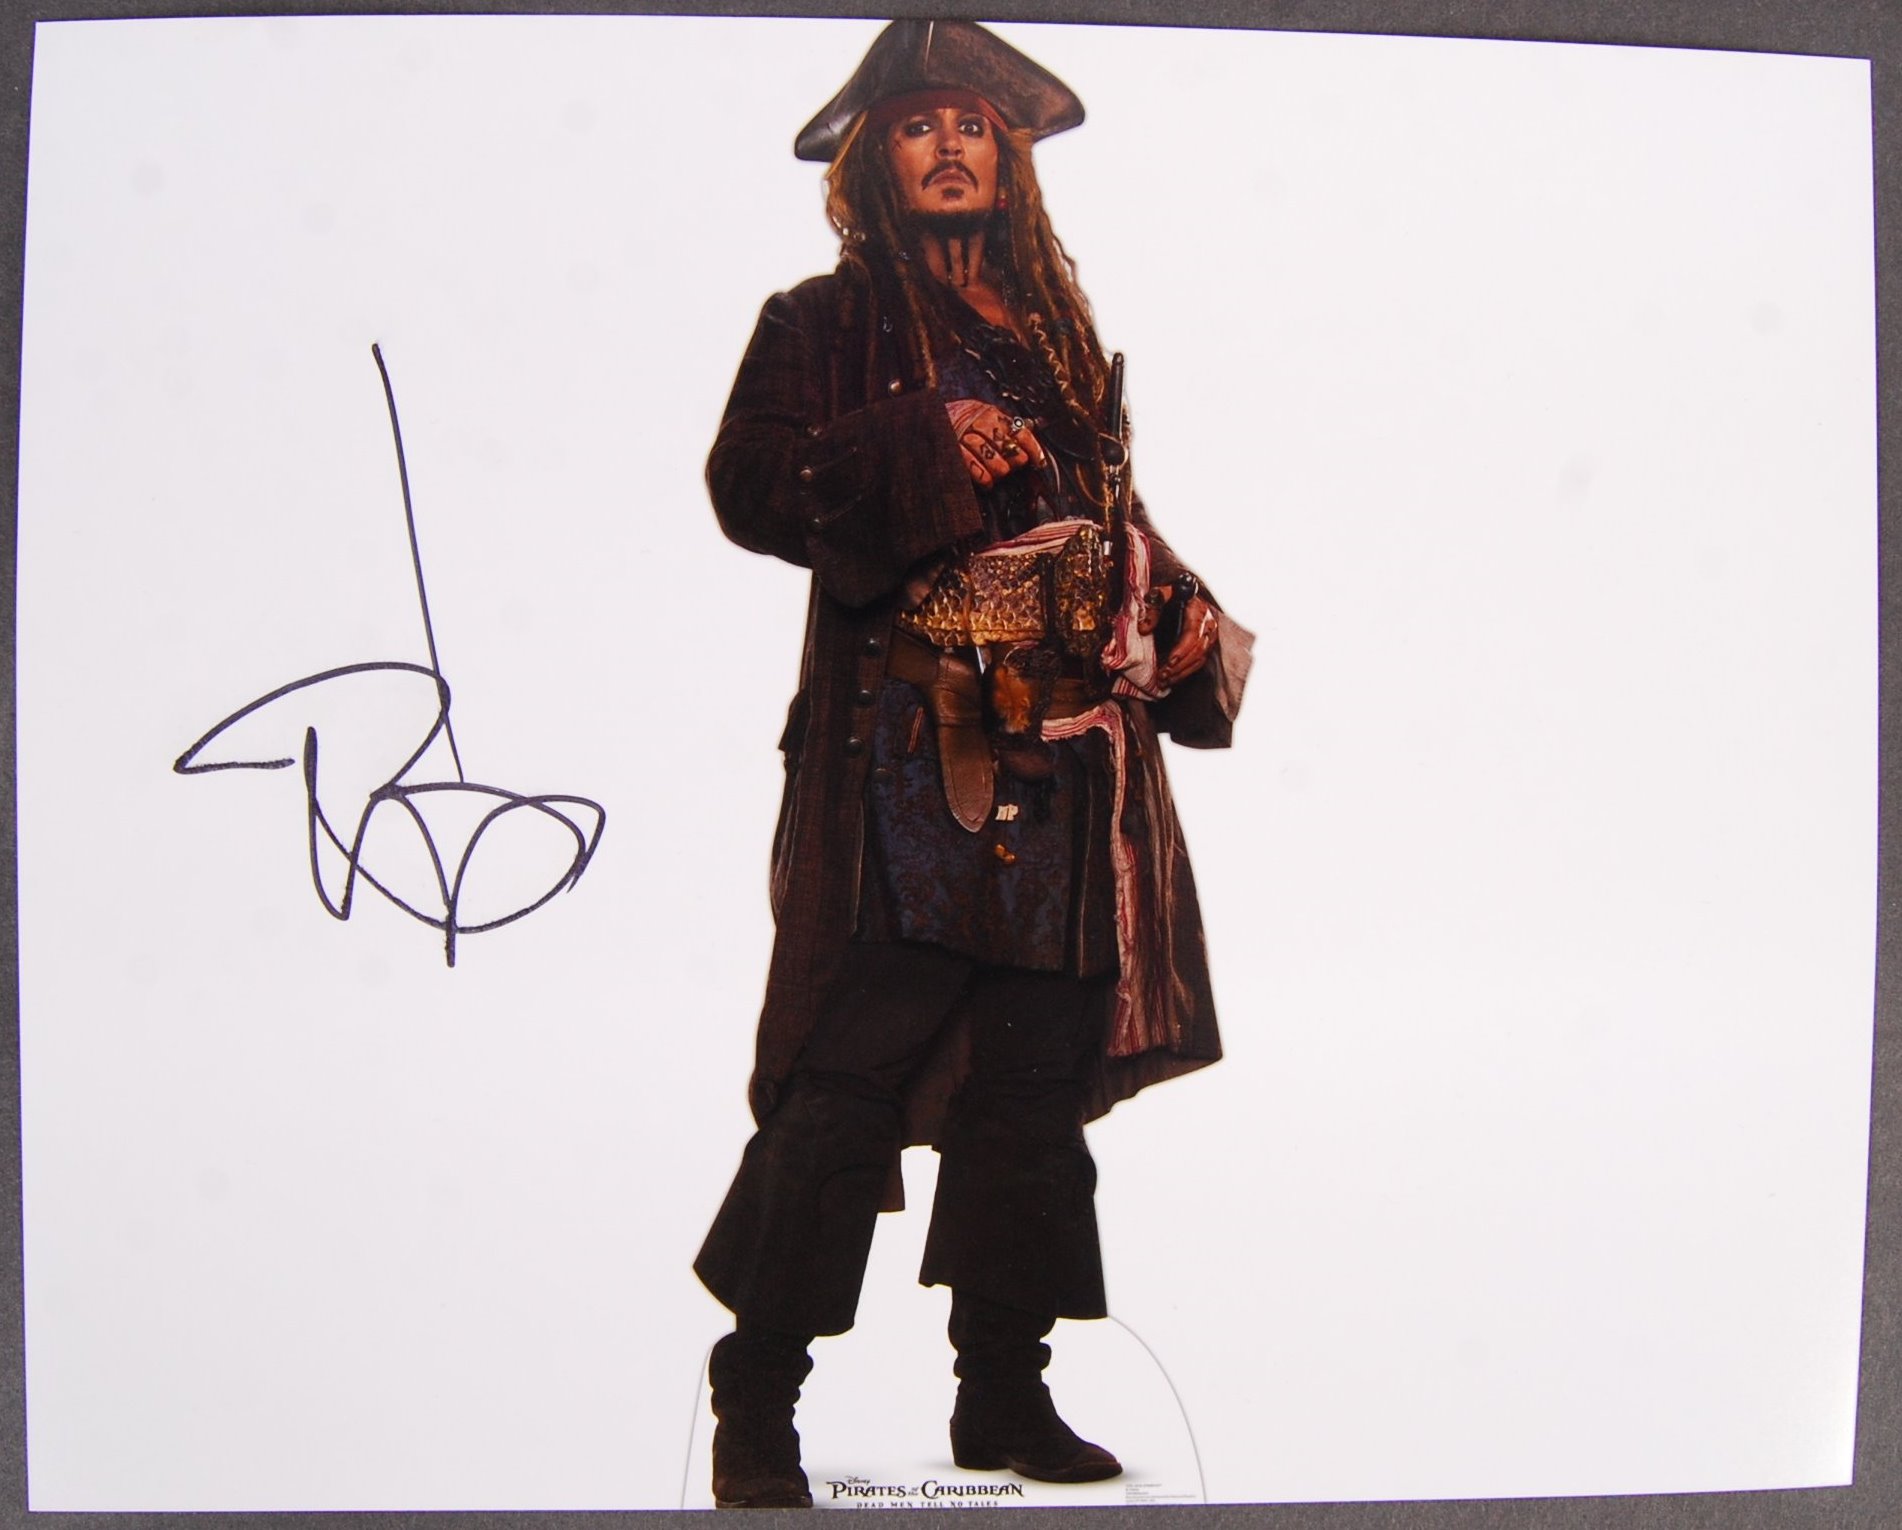 JOHNNY DEPP - PIRATES OF THE CARIBBEAN SIGNED 8X10" PHOTO